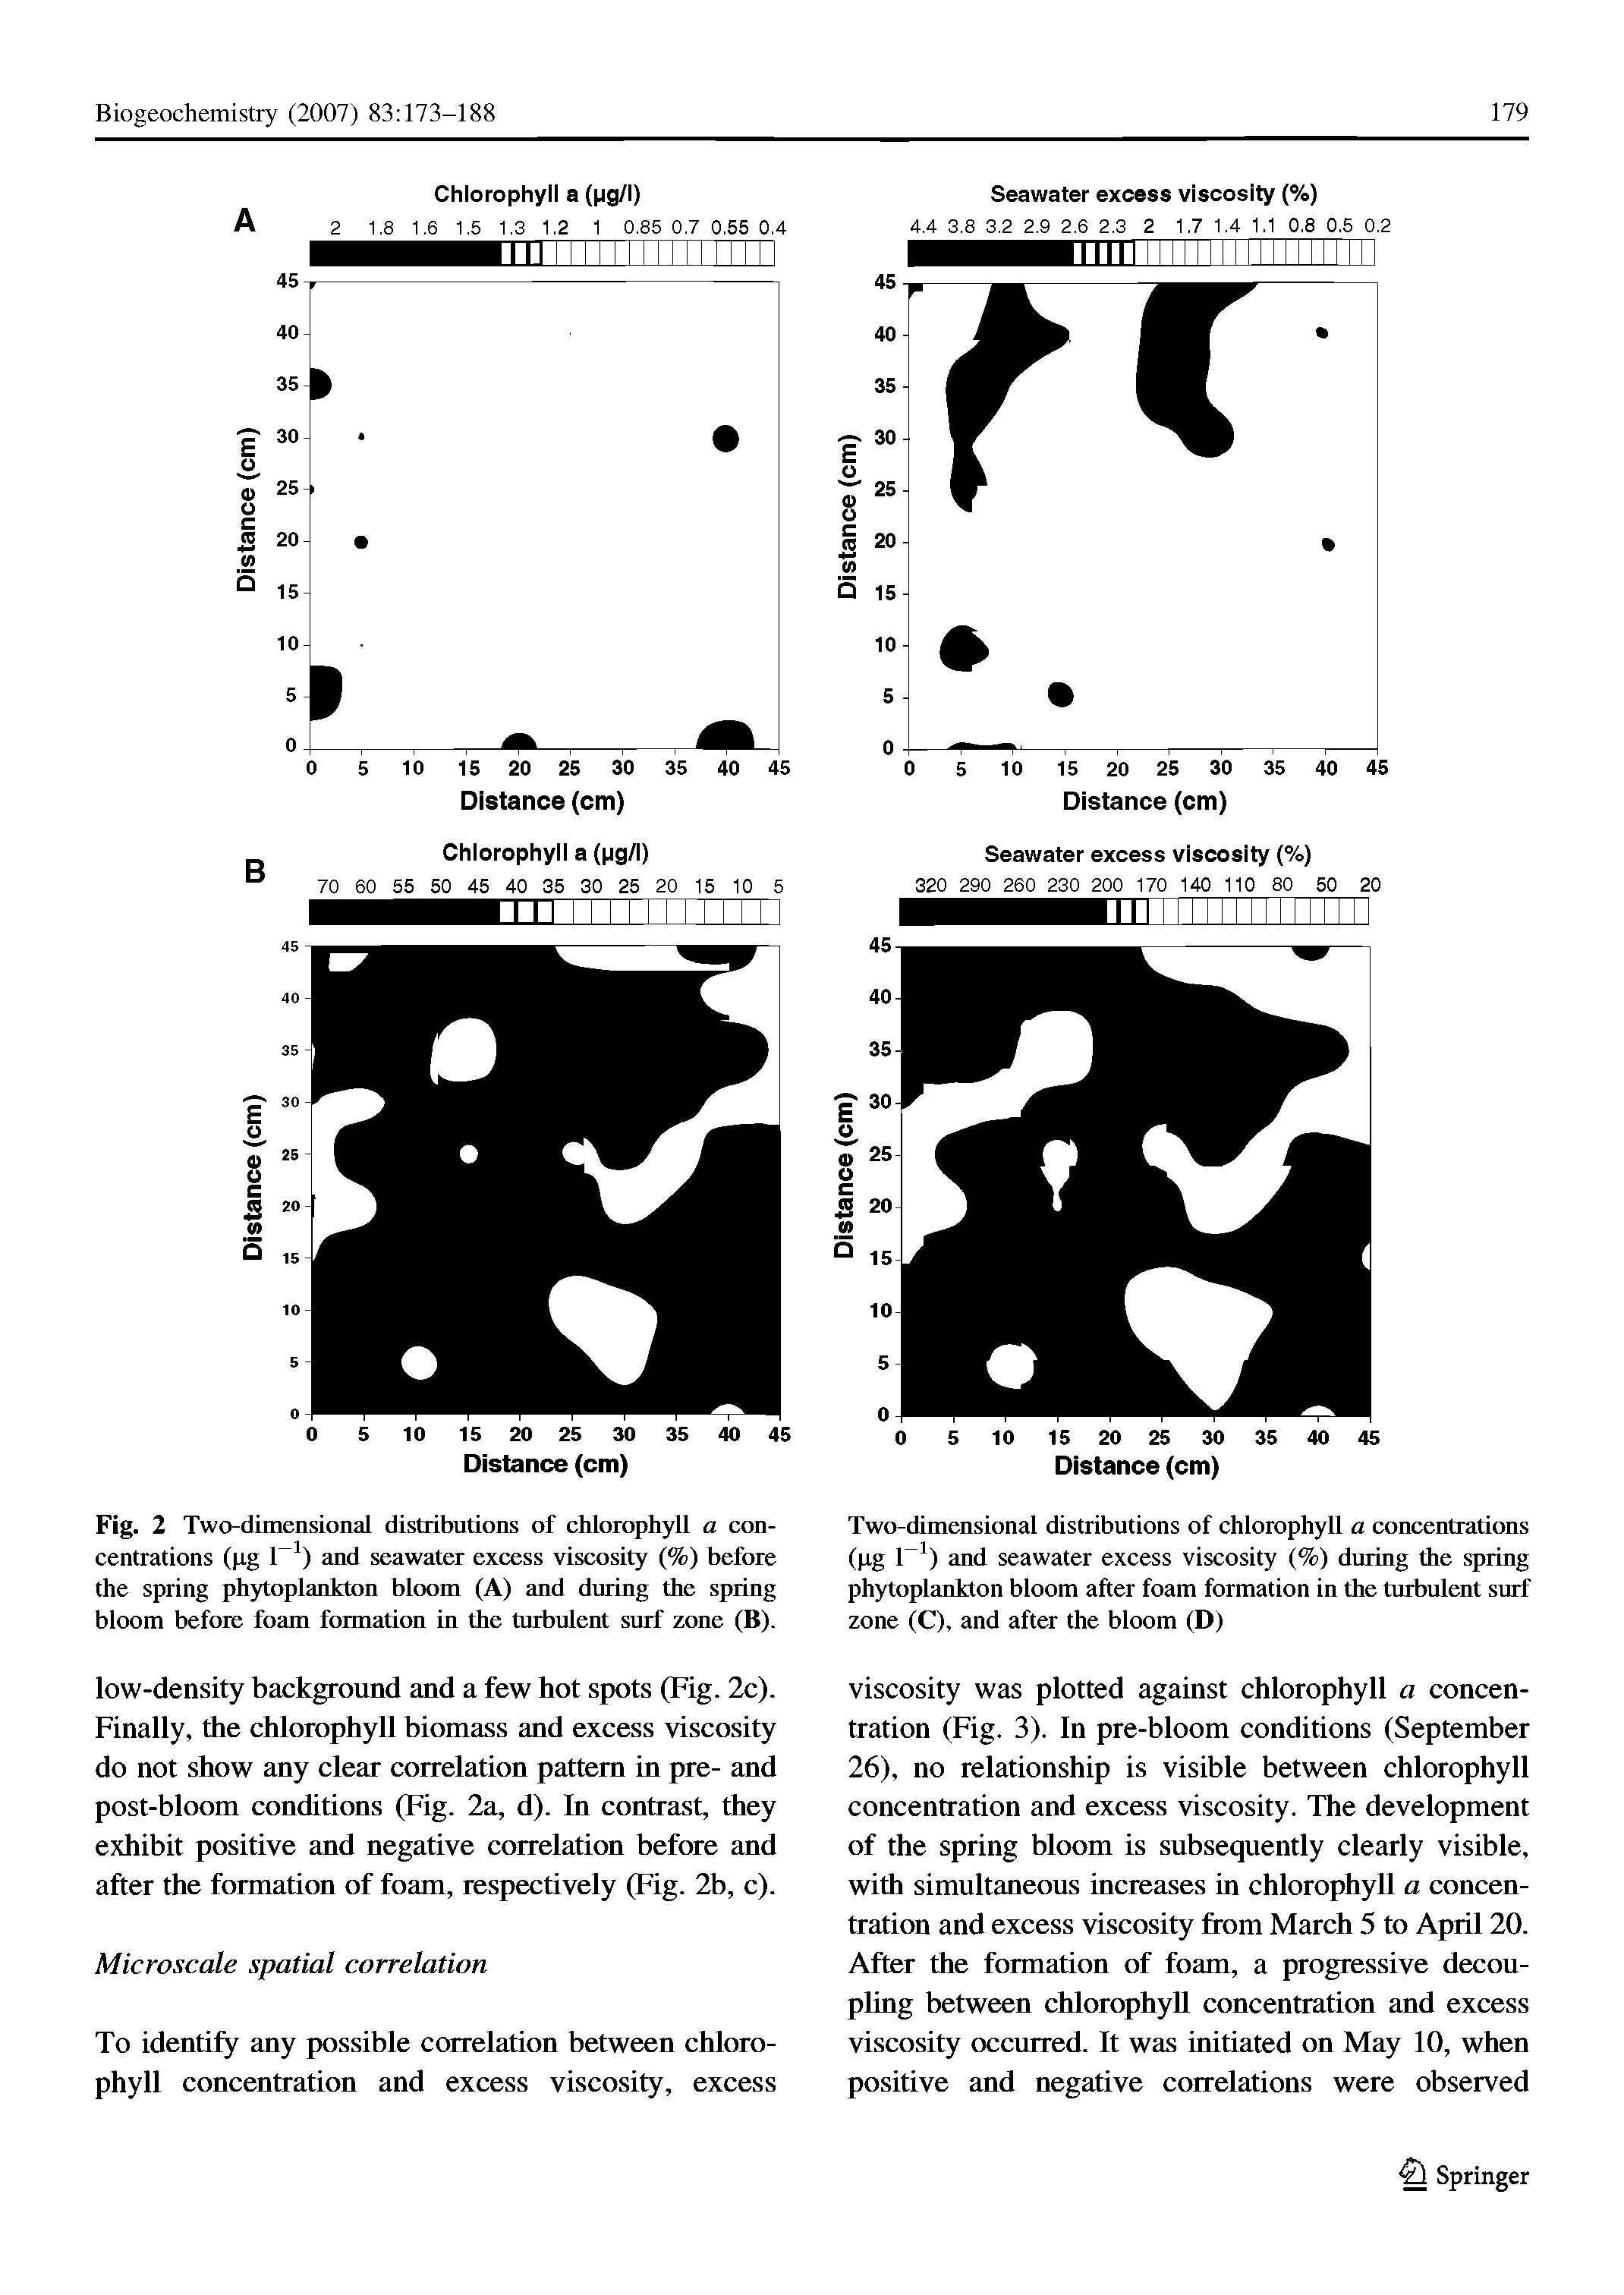 Fig. 2 Two-dimensional distributions of chlorophyll a concentrations (pg I ) and seawater excess viscosity (%) before the spring phytoplankton bloom (A) and during the spring bloom before foam formation in the turbulent surf zone (B).